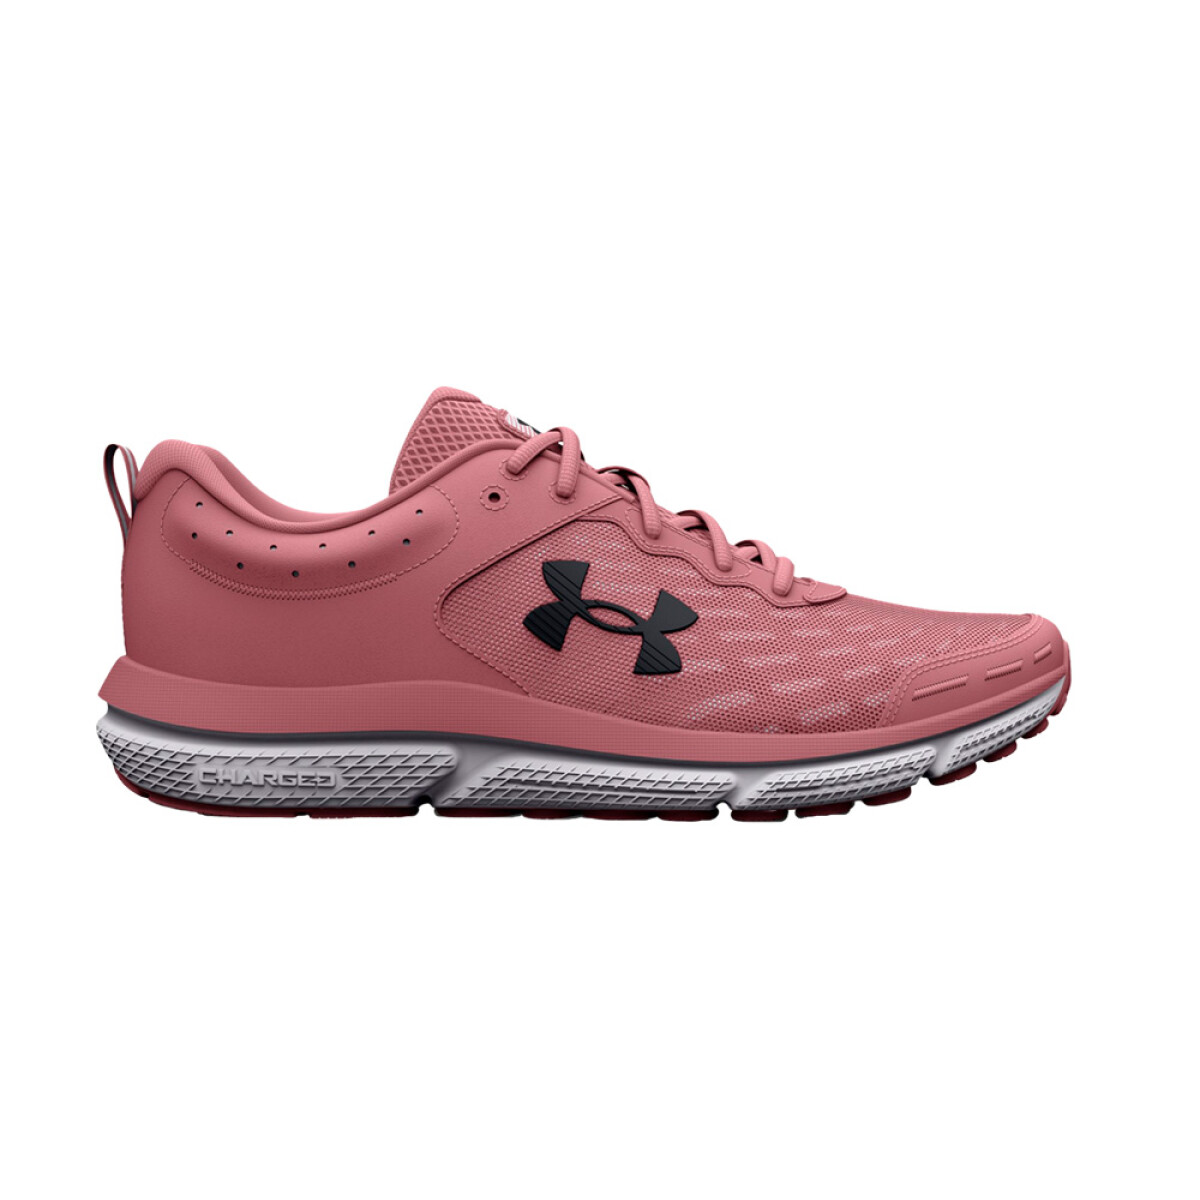 UNDER ARMOUR CHARGED ASSERT 10 - 600 